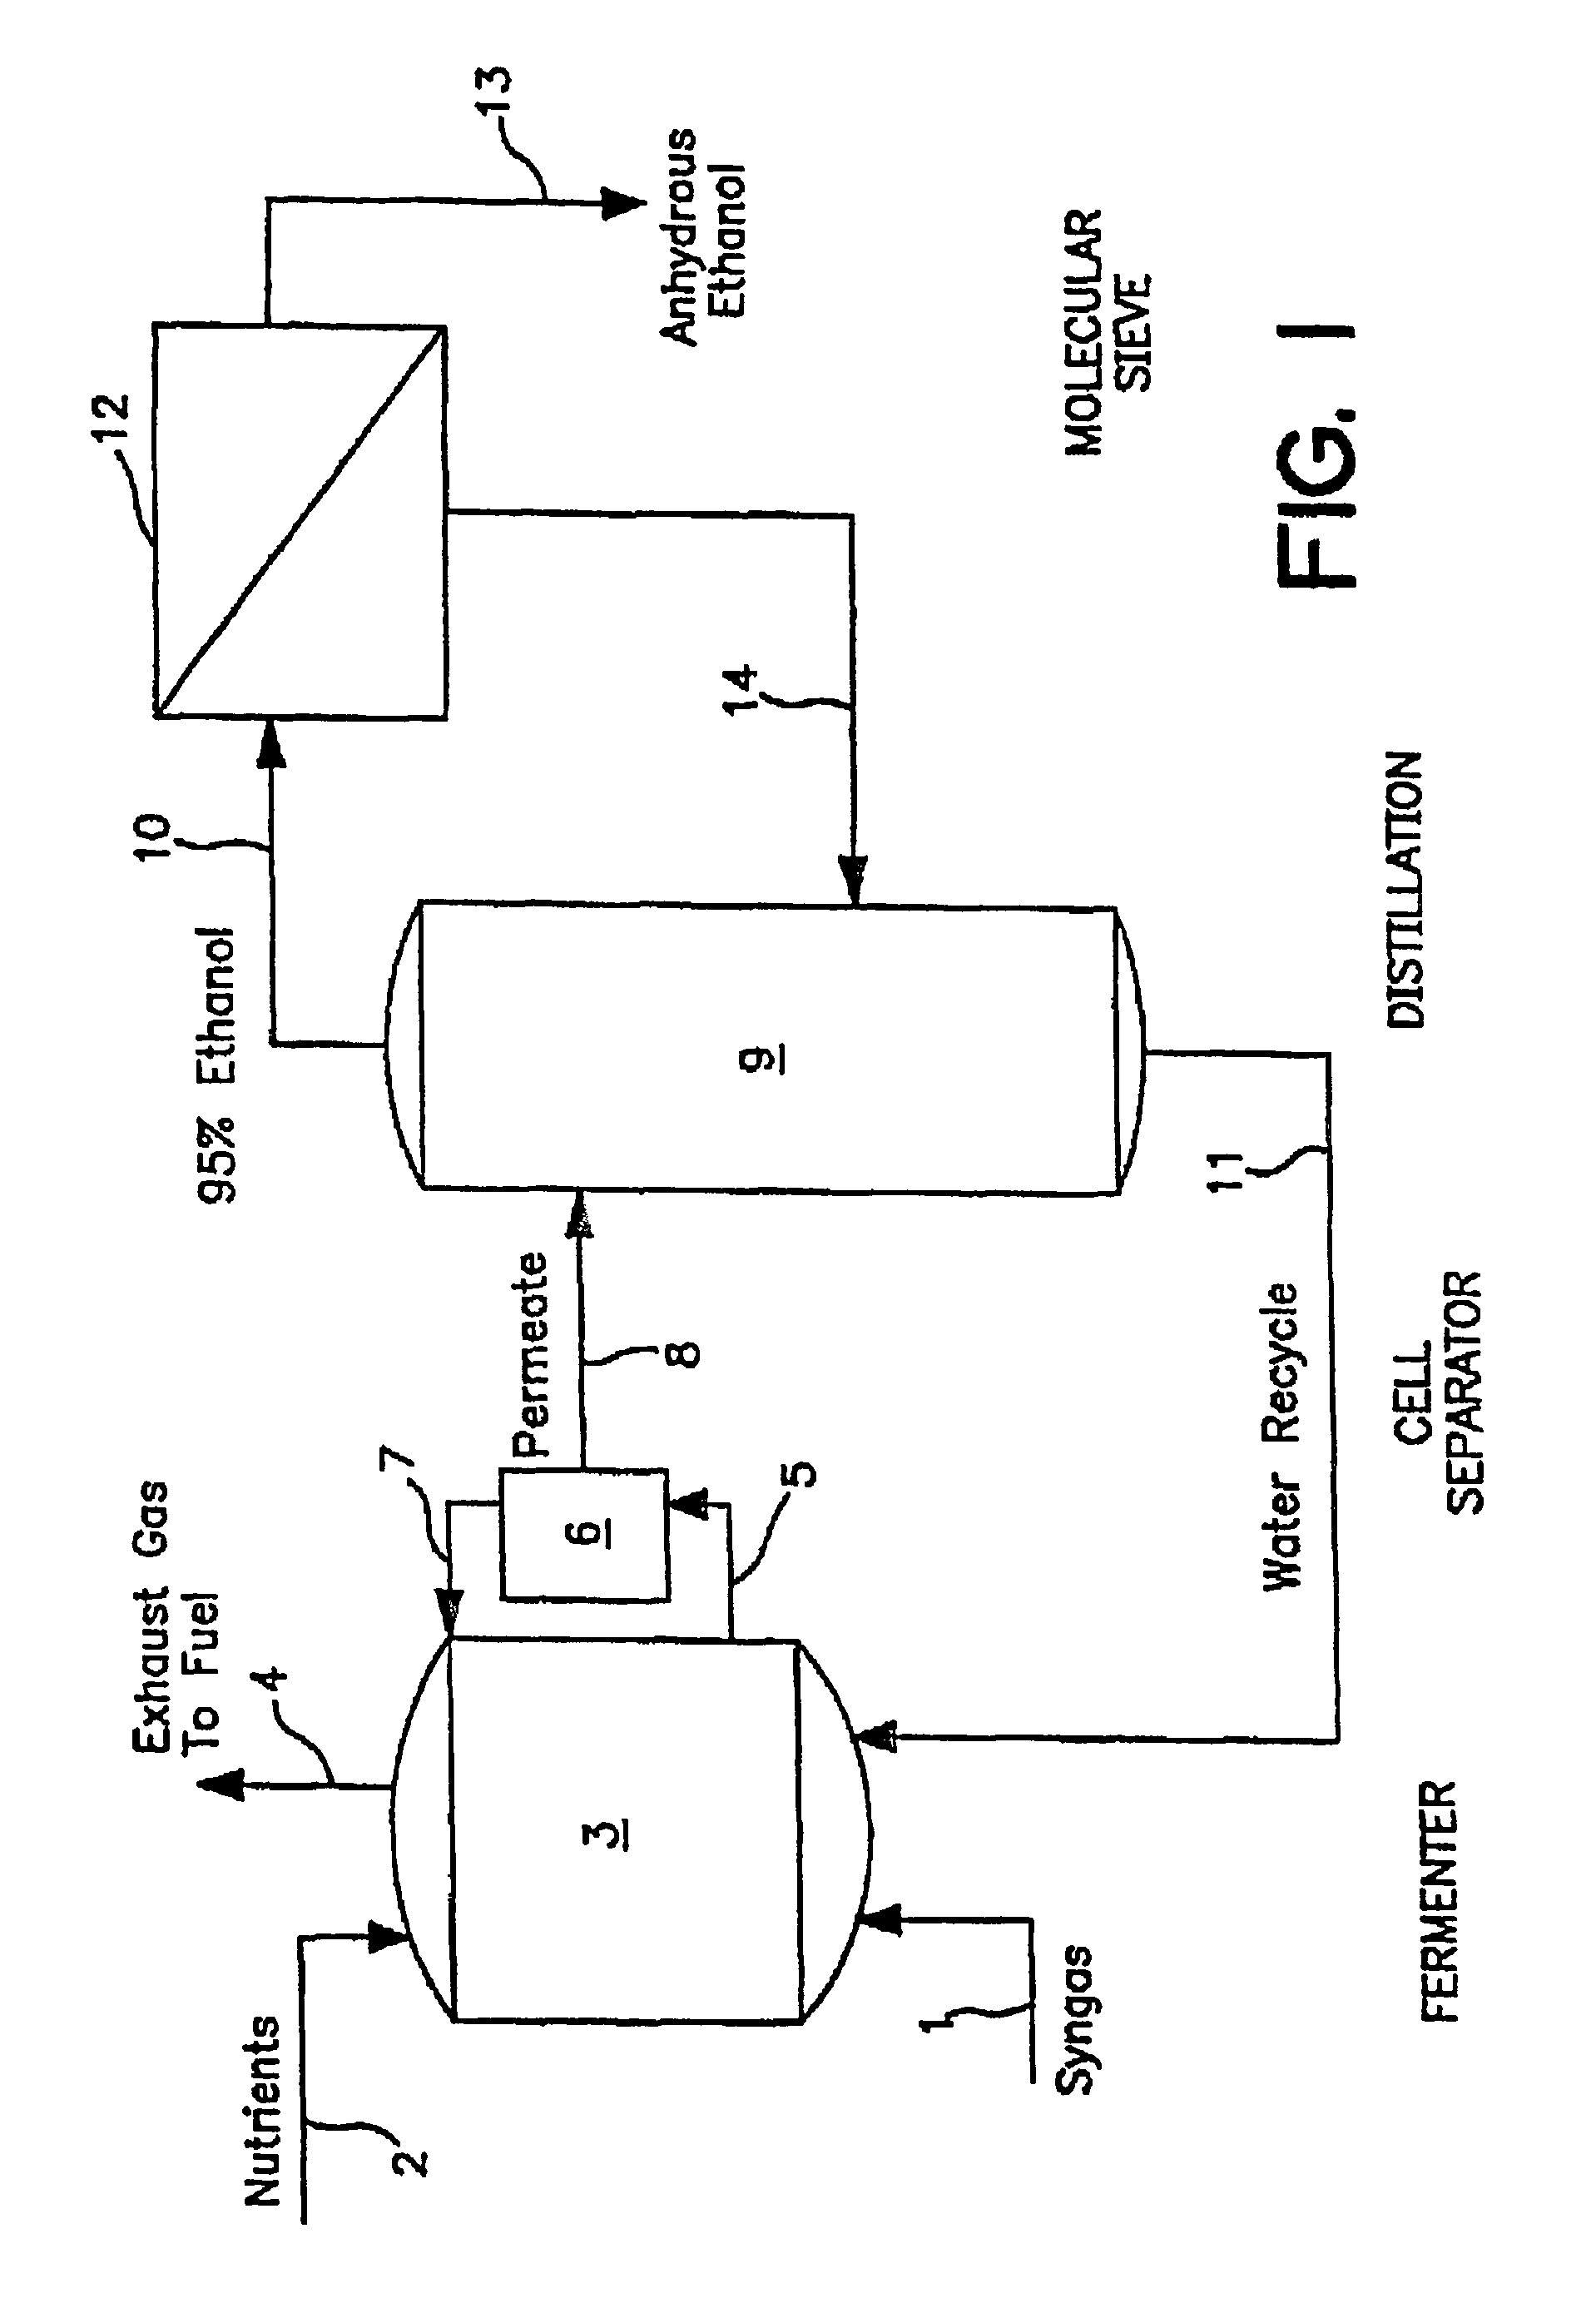 Method for sustaining microorganism culture in syngas fermentation process in decreased concentration or absence of various substrates